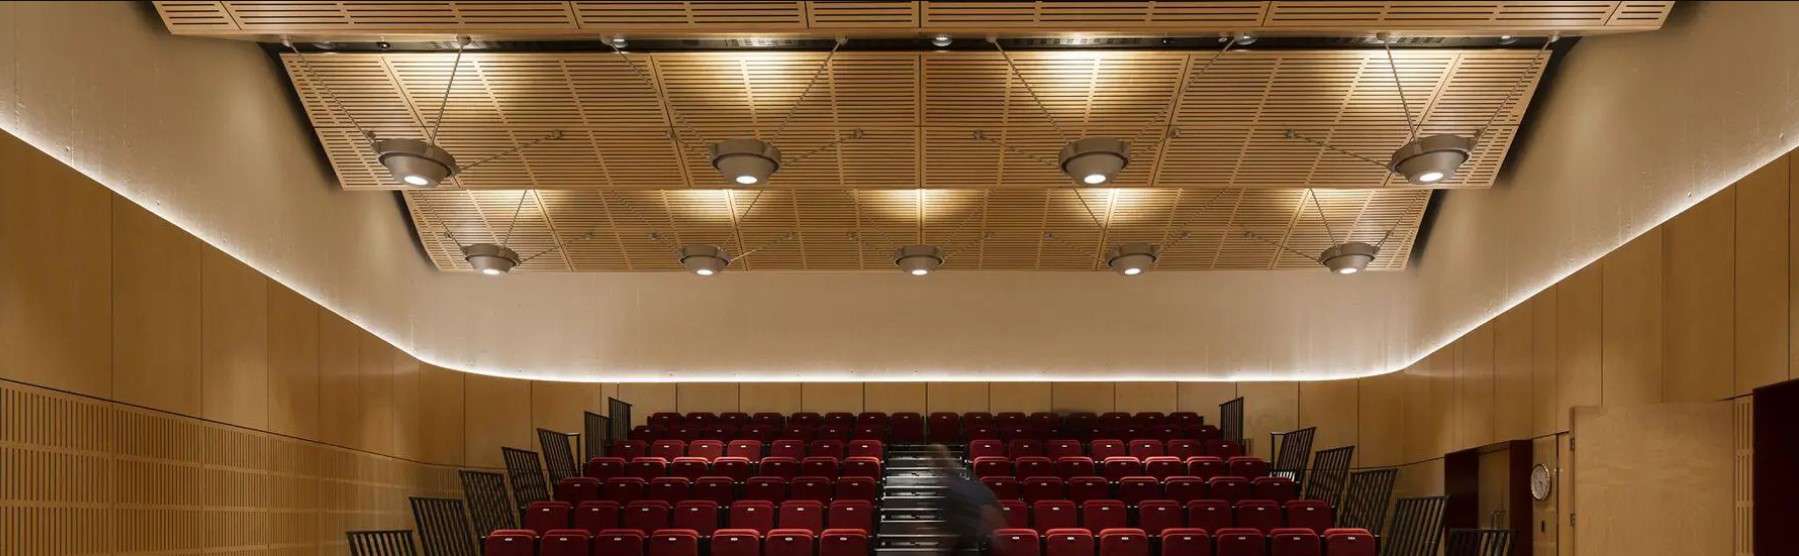 acoustic-panels-architectural-soundproofing